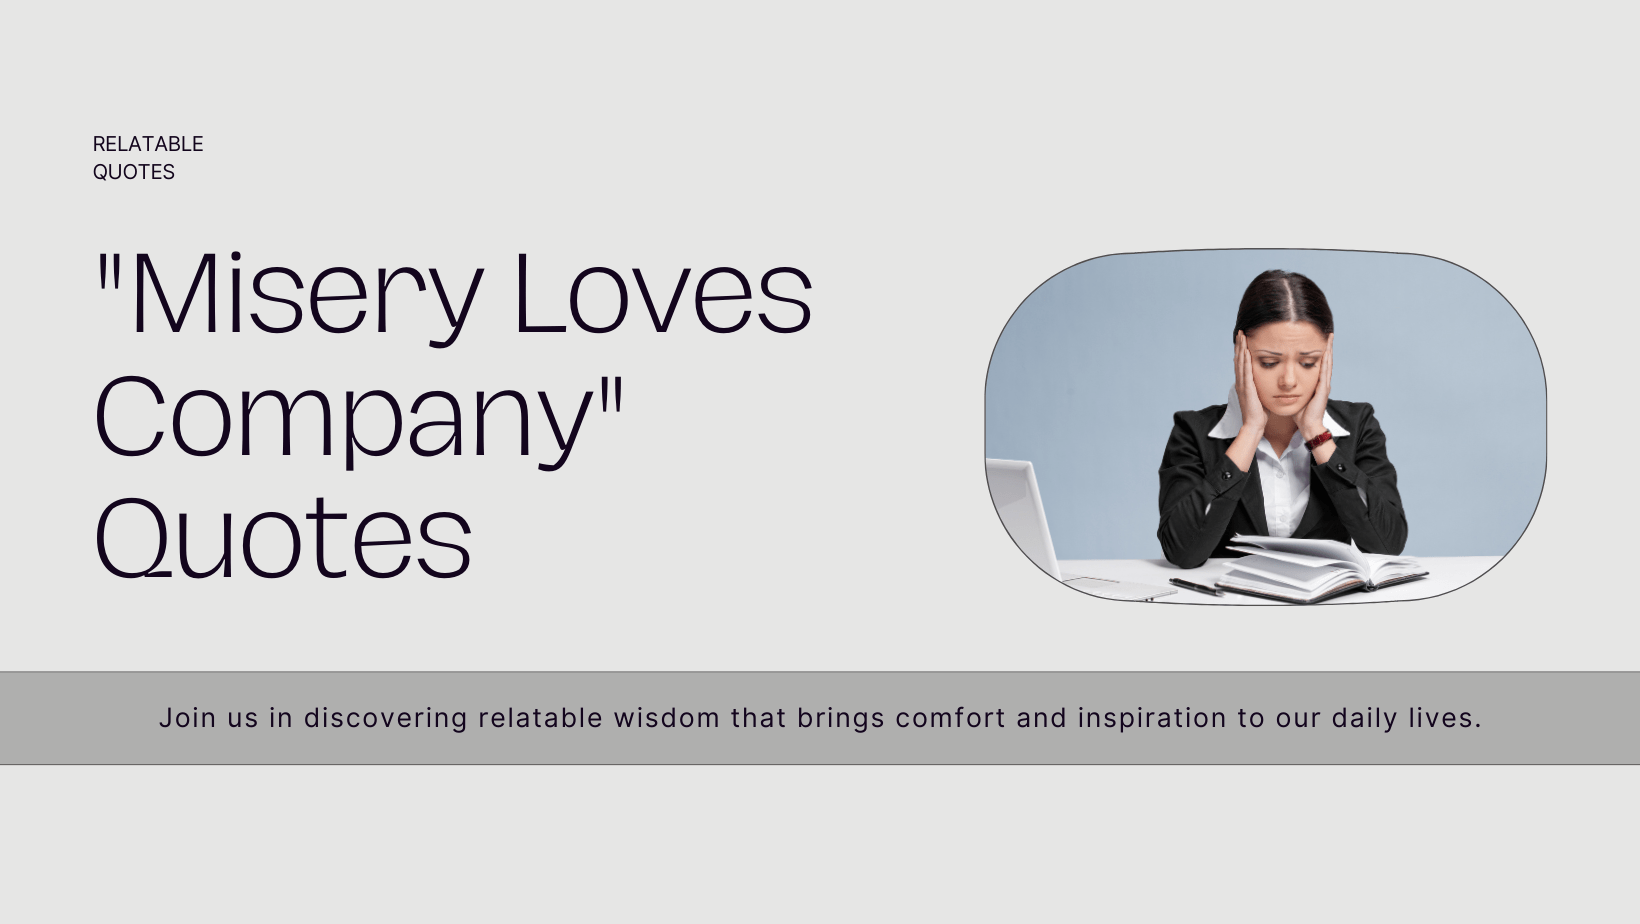 Misery Loves Company Quotes: Discover Relatable Wisdom